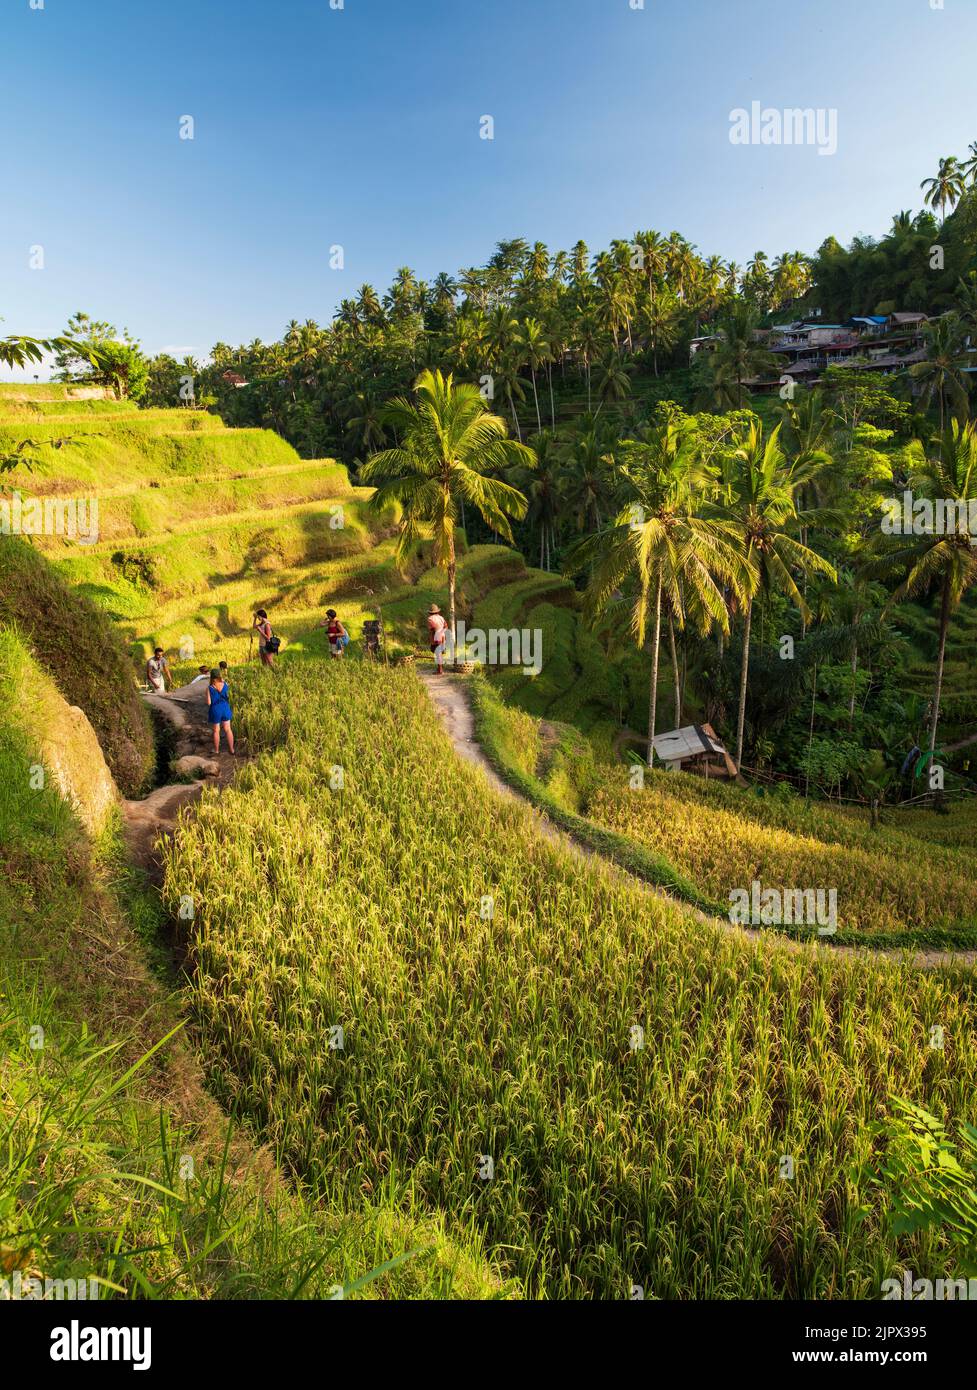 The landscape of the ricefields. Rice terraces famous place Tegallalang near Ubud. The island Bali in indonesia in southeastasia. Stock Photo